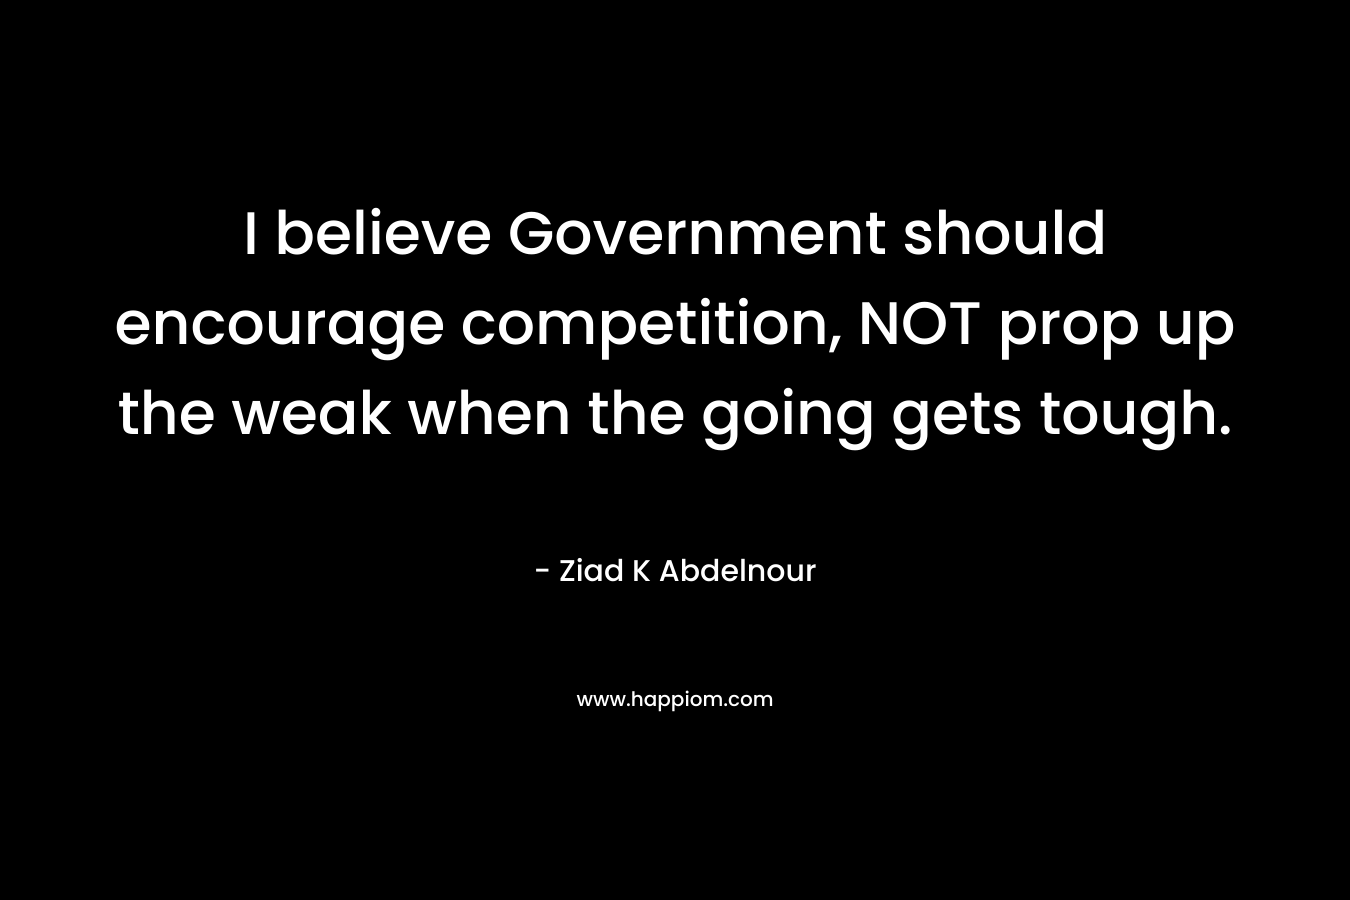 I believe Government should encourage competition, NOT prop up the weak when the going gets tough.